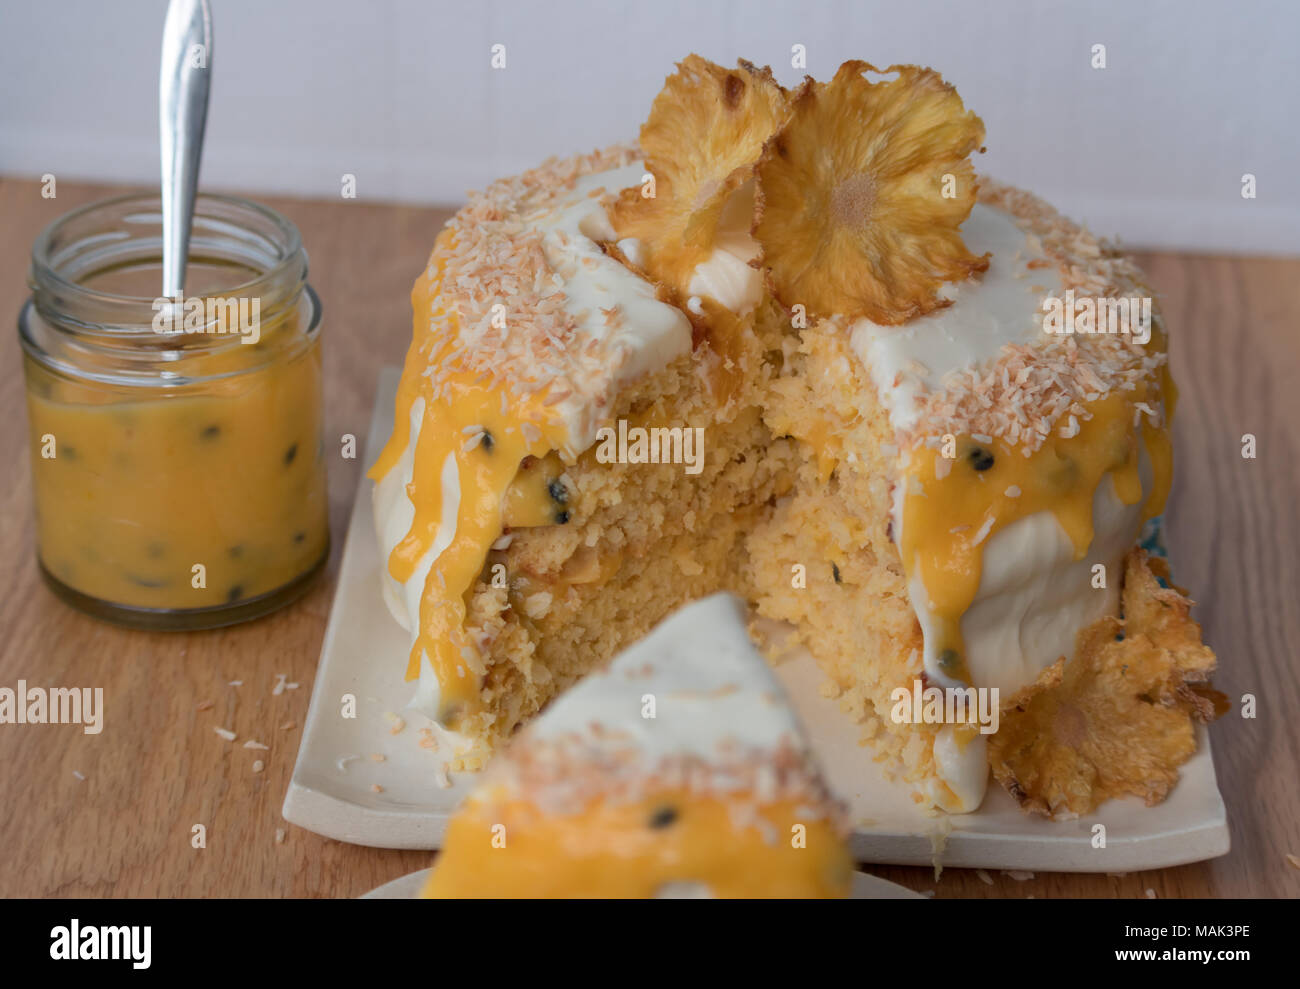 Sliced pineapple and coconut layer cake with passion fruit sauce. Decorated with pineapple flowers. Stock Photo